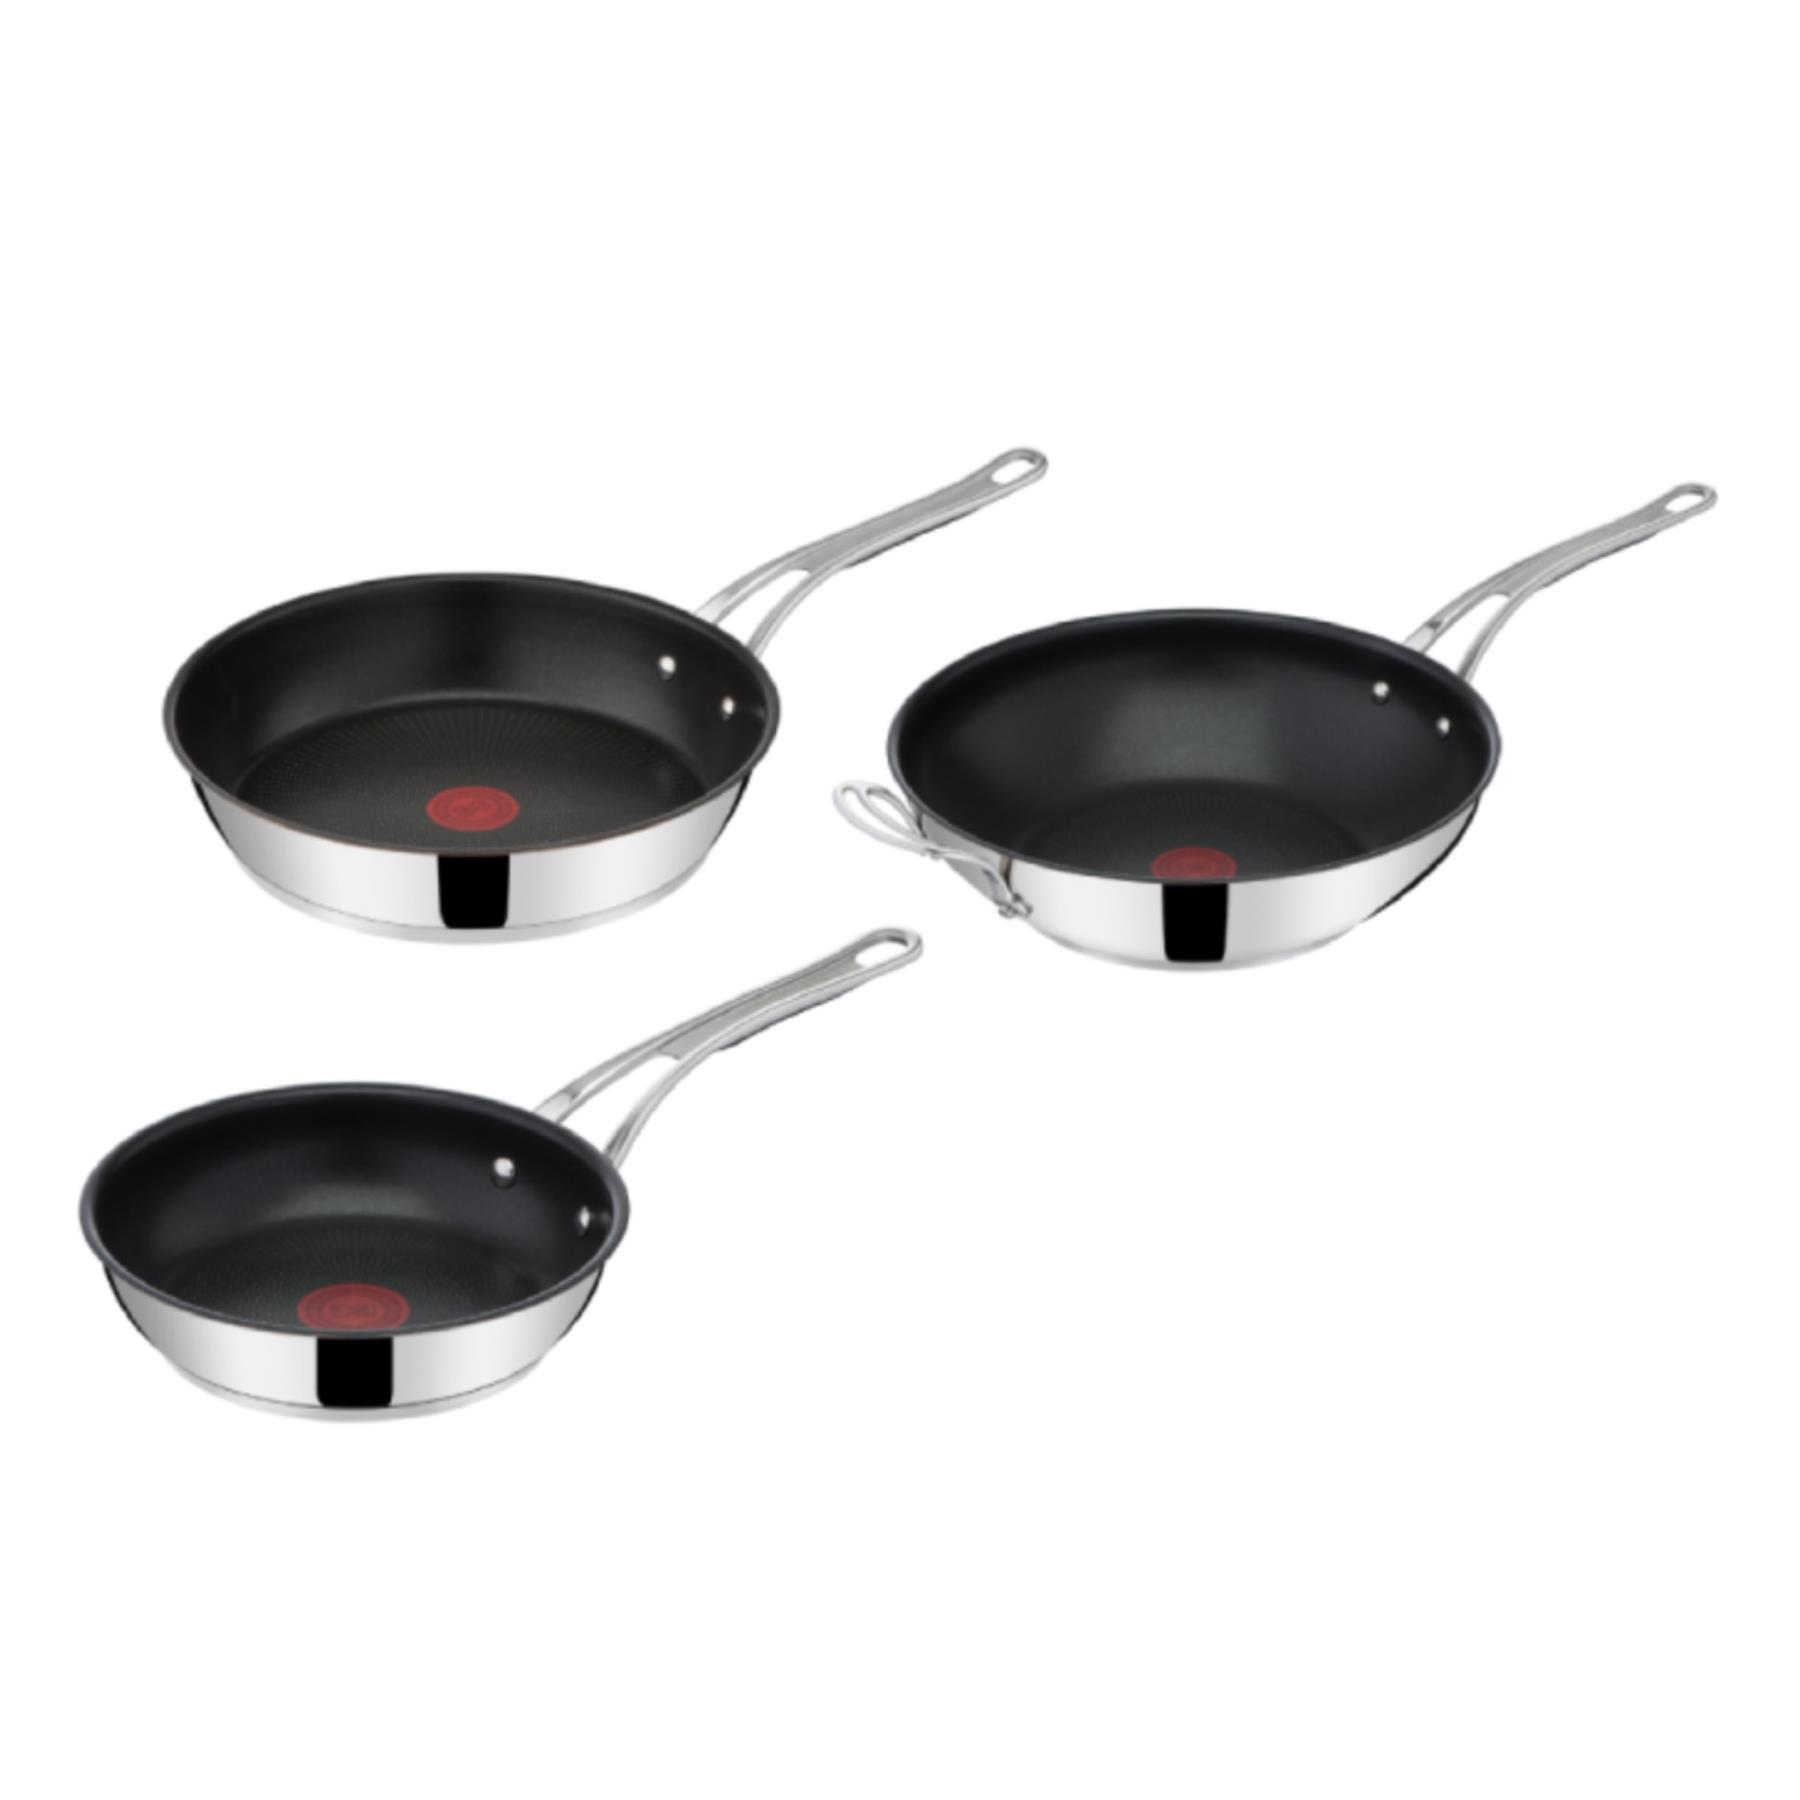 FonQ Jamie Oliver by Tefal Cook's Classic Pannenset aanbieding